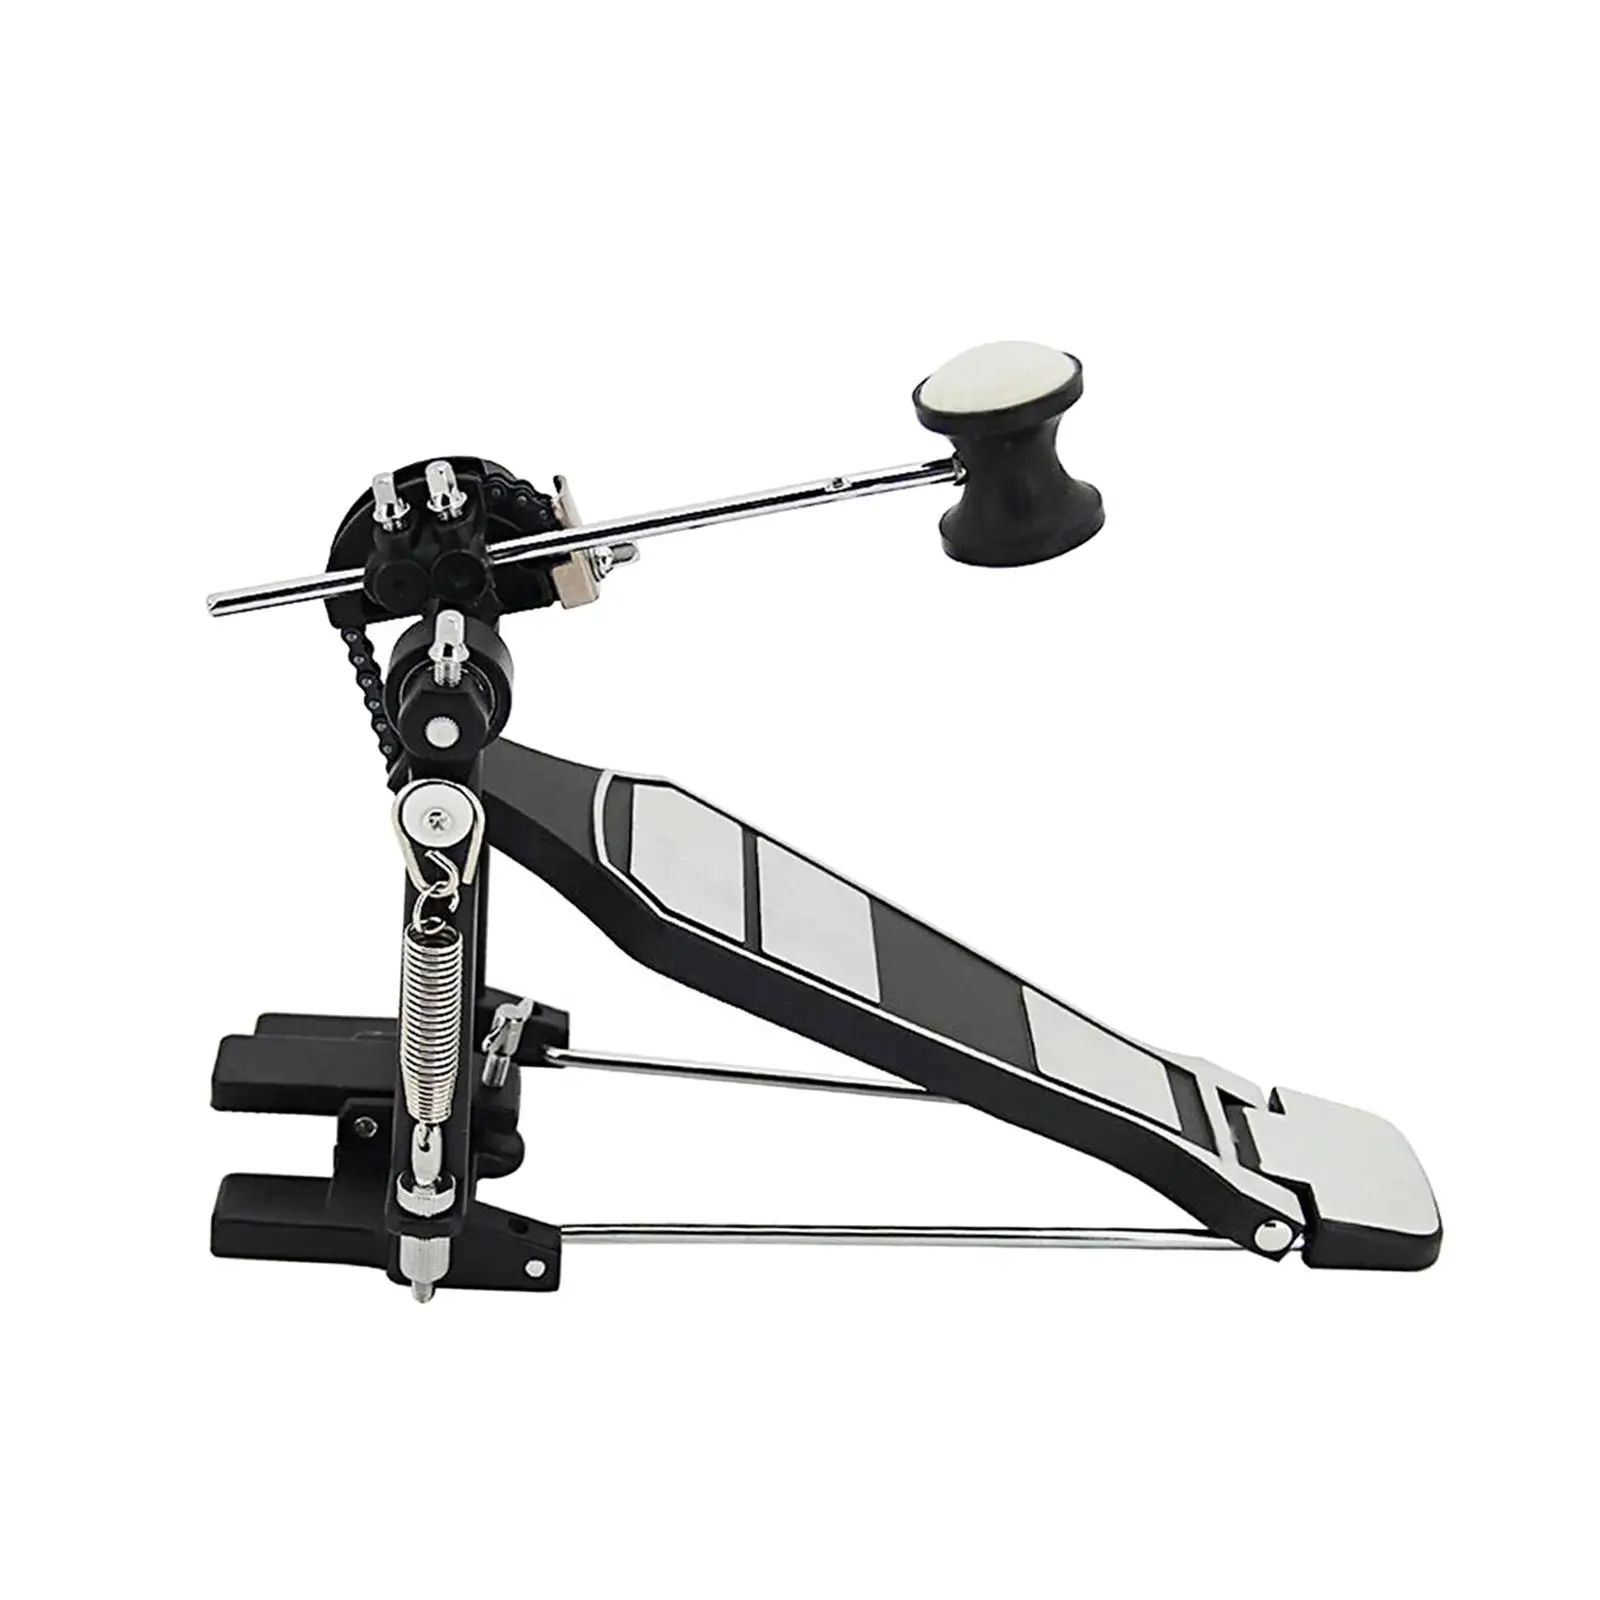 Bass Drum Pedal Drum Step on Beater Fully Adjustable Durable